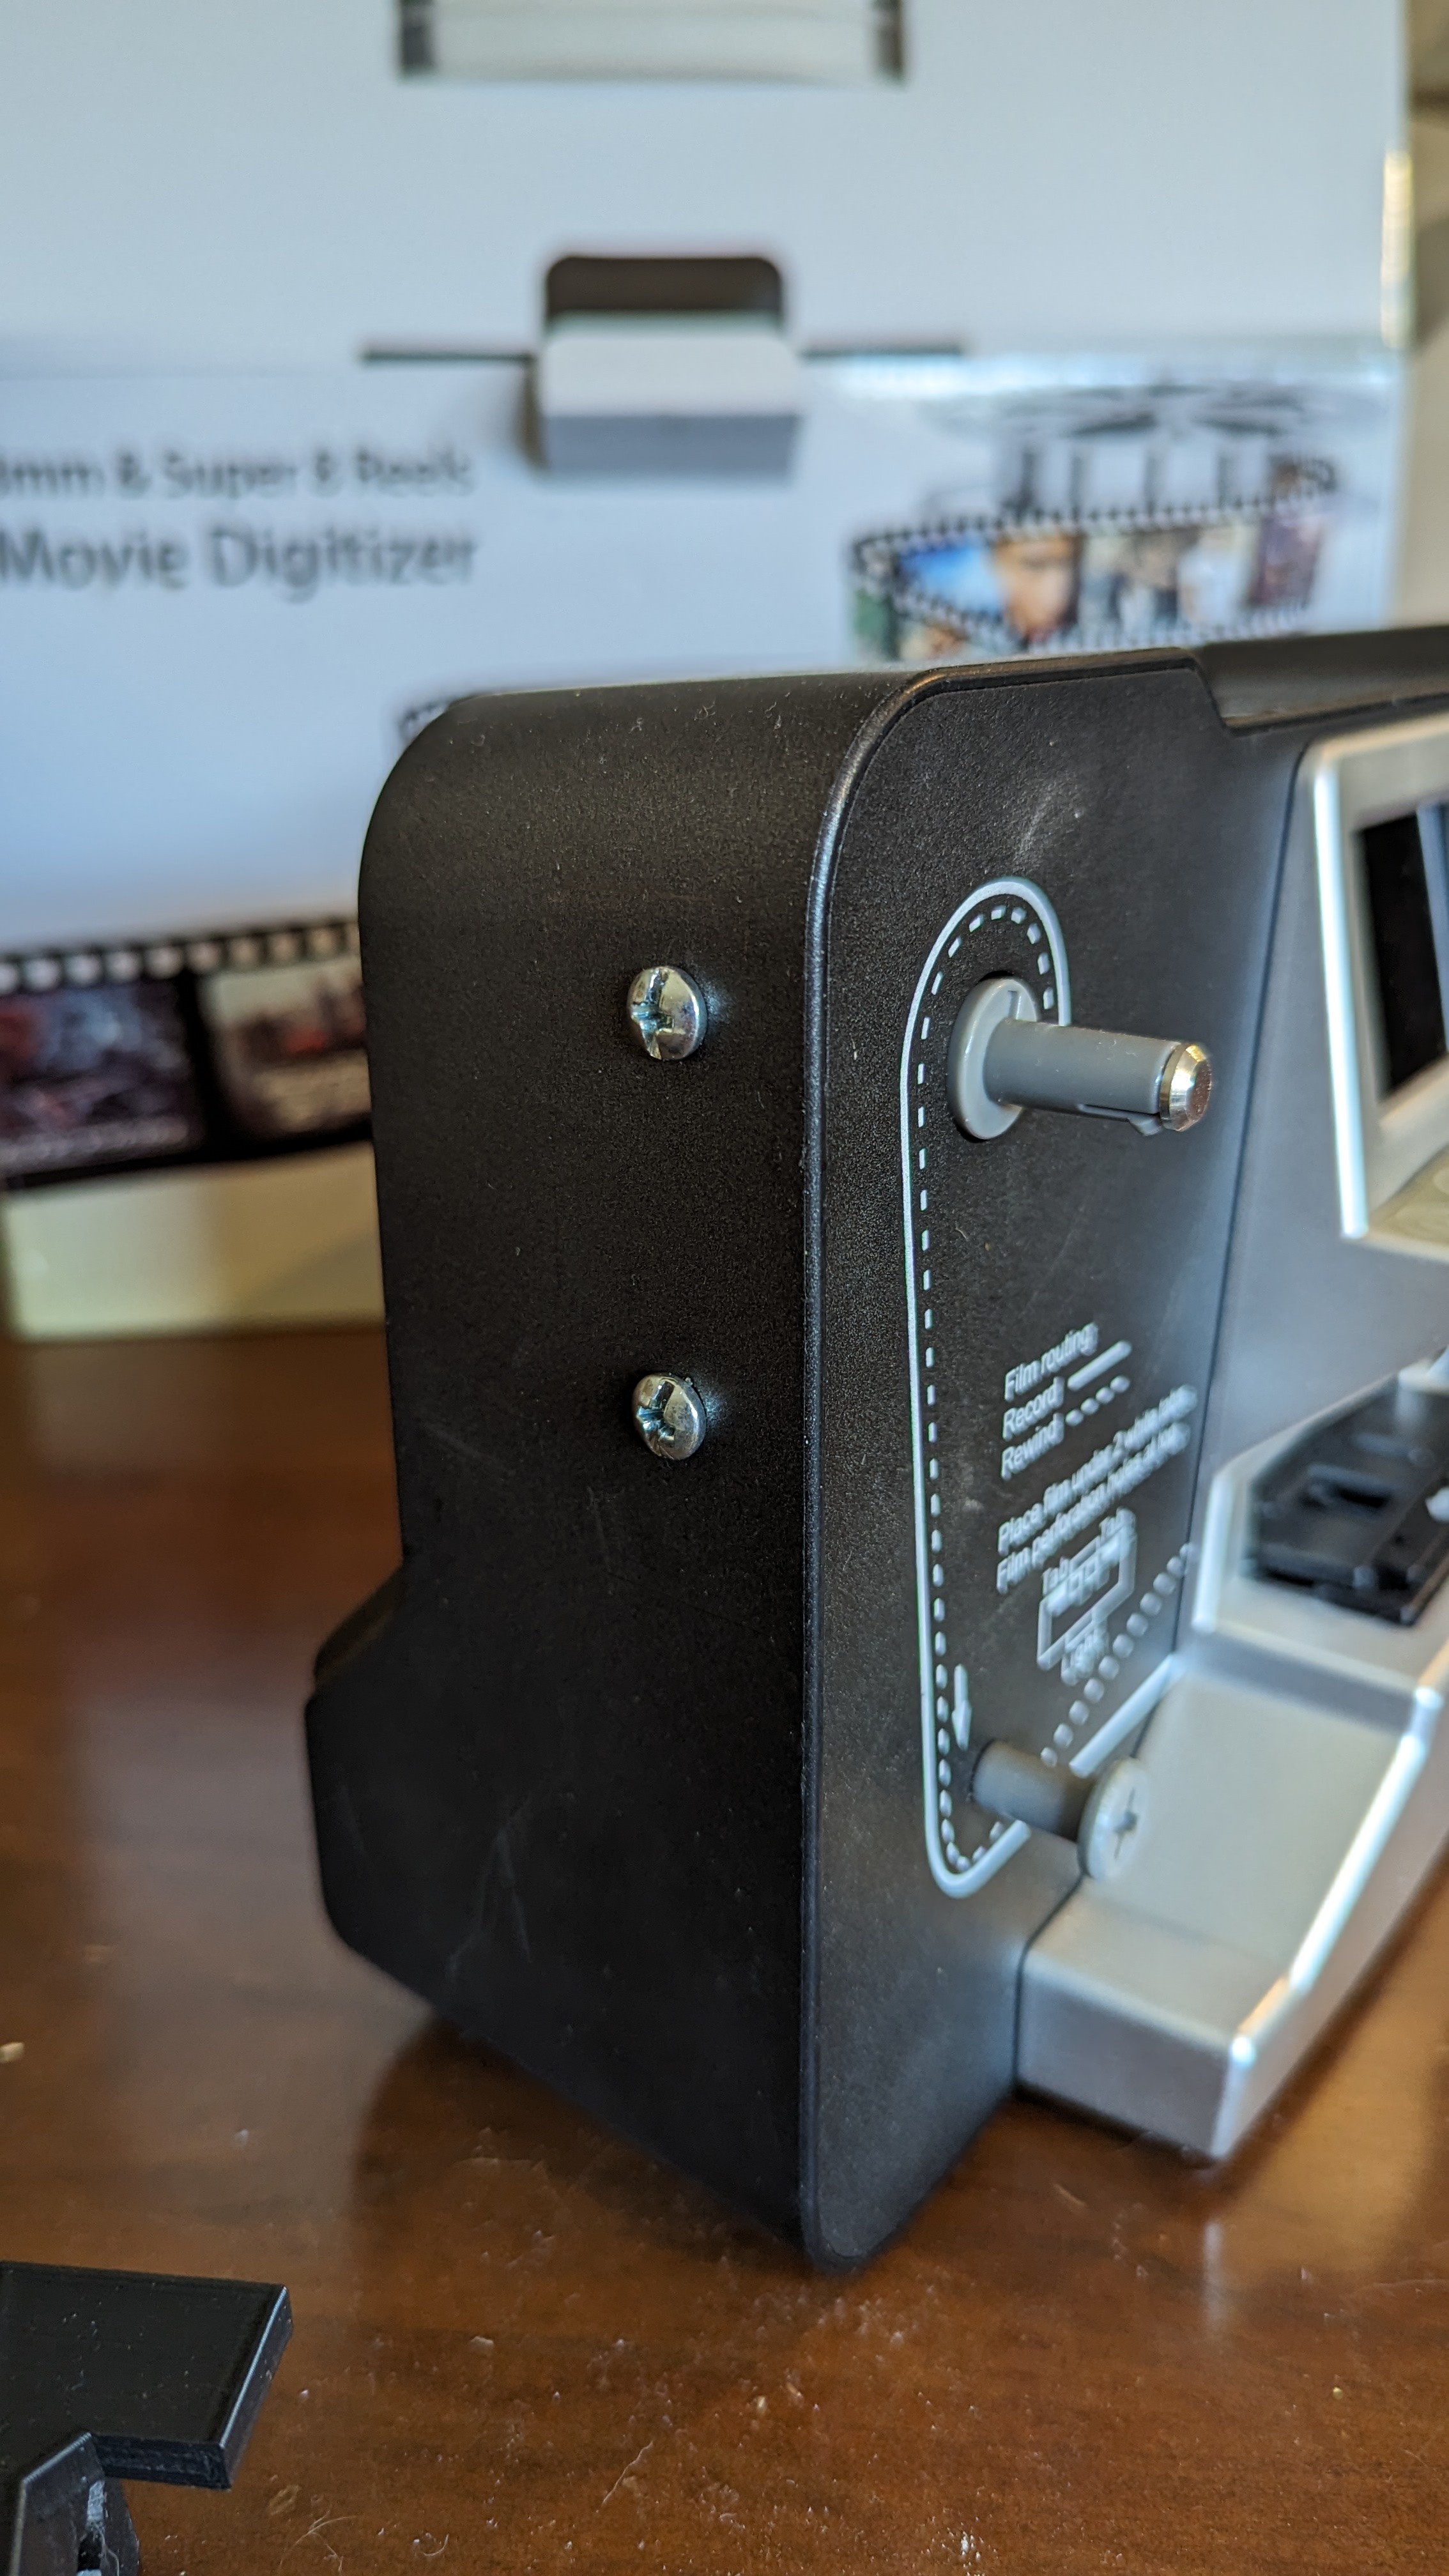 Wolverine 8mm and Super8 Reels Movie Digitizer Clone Review 